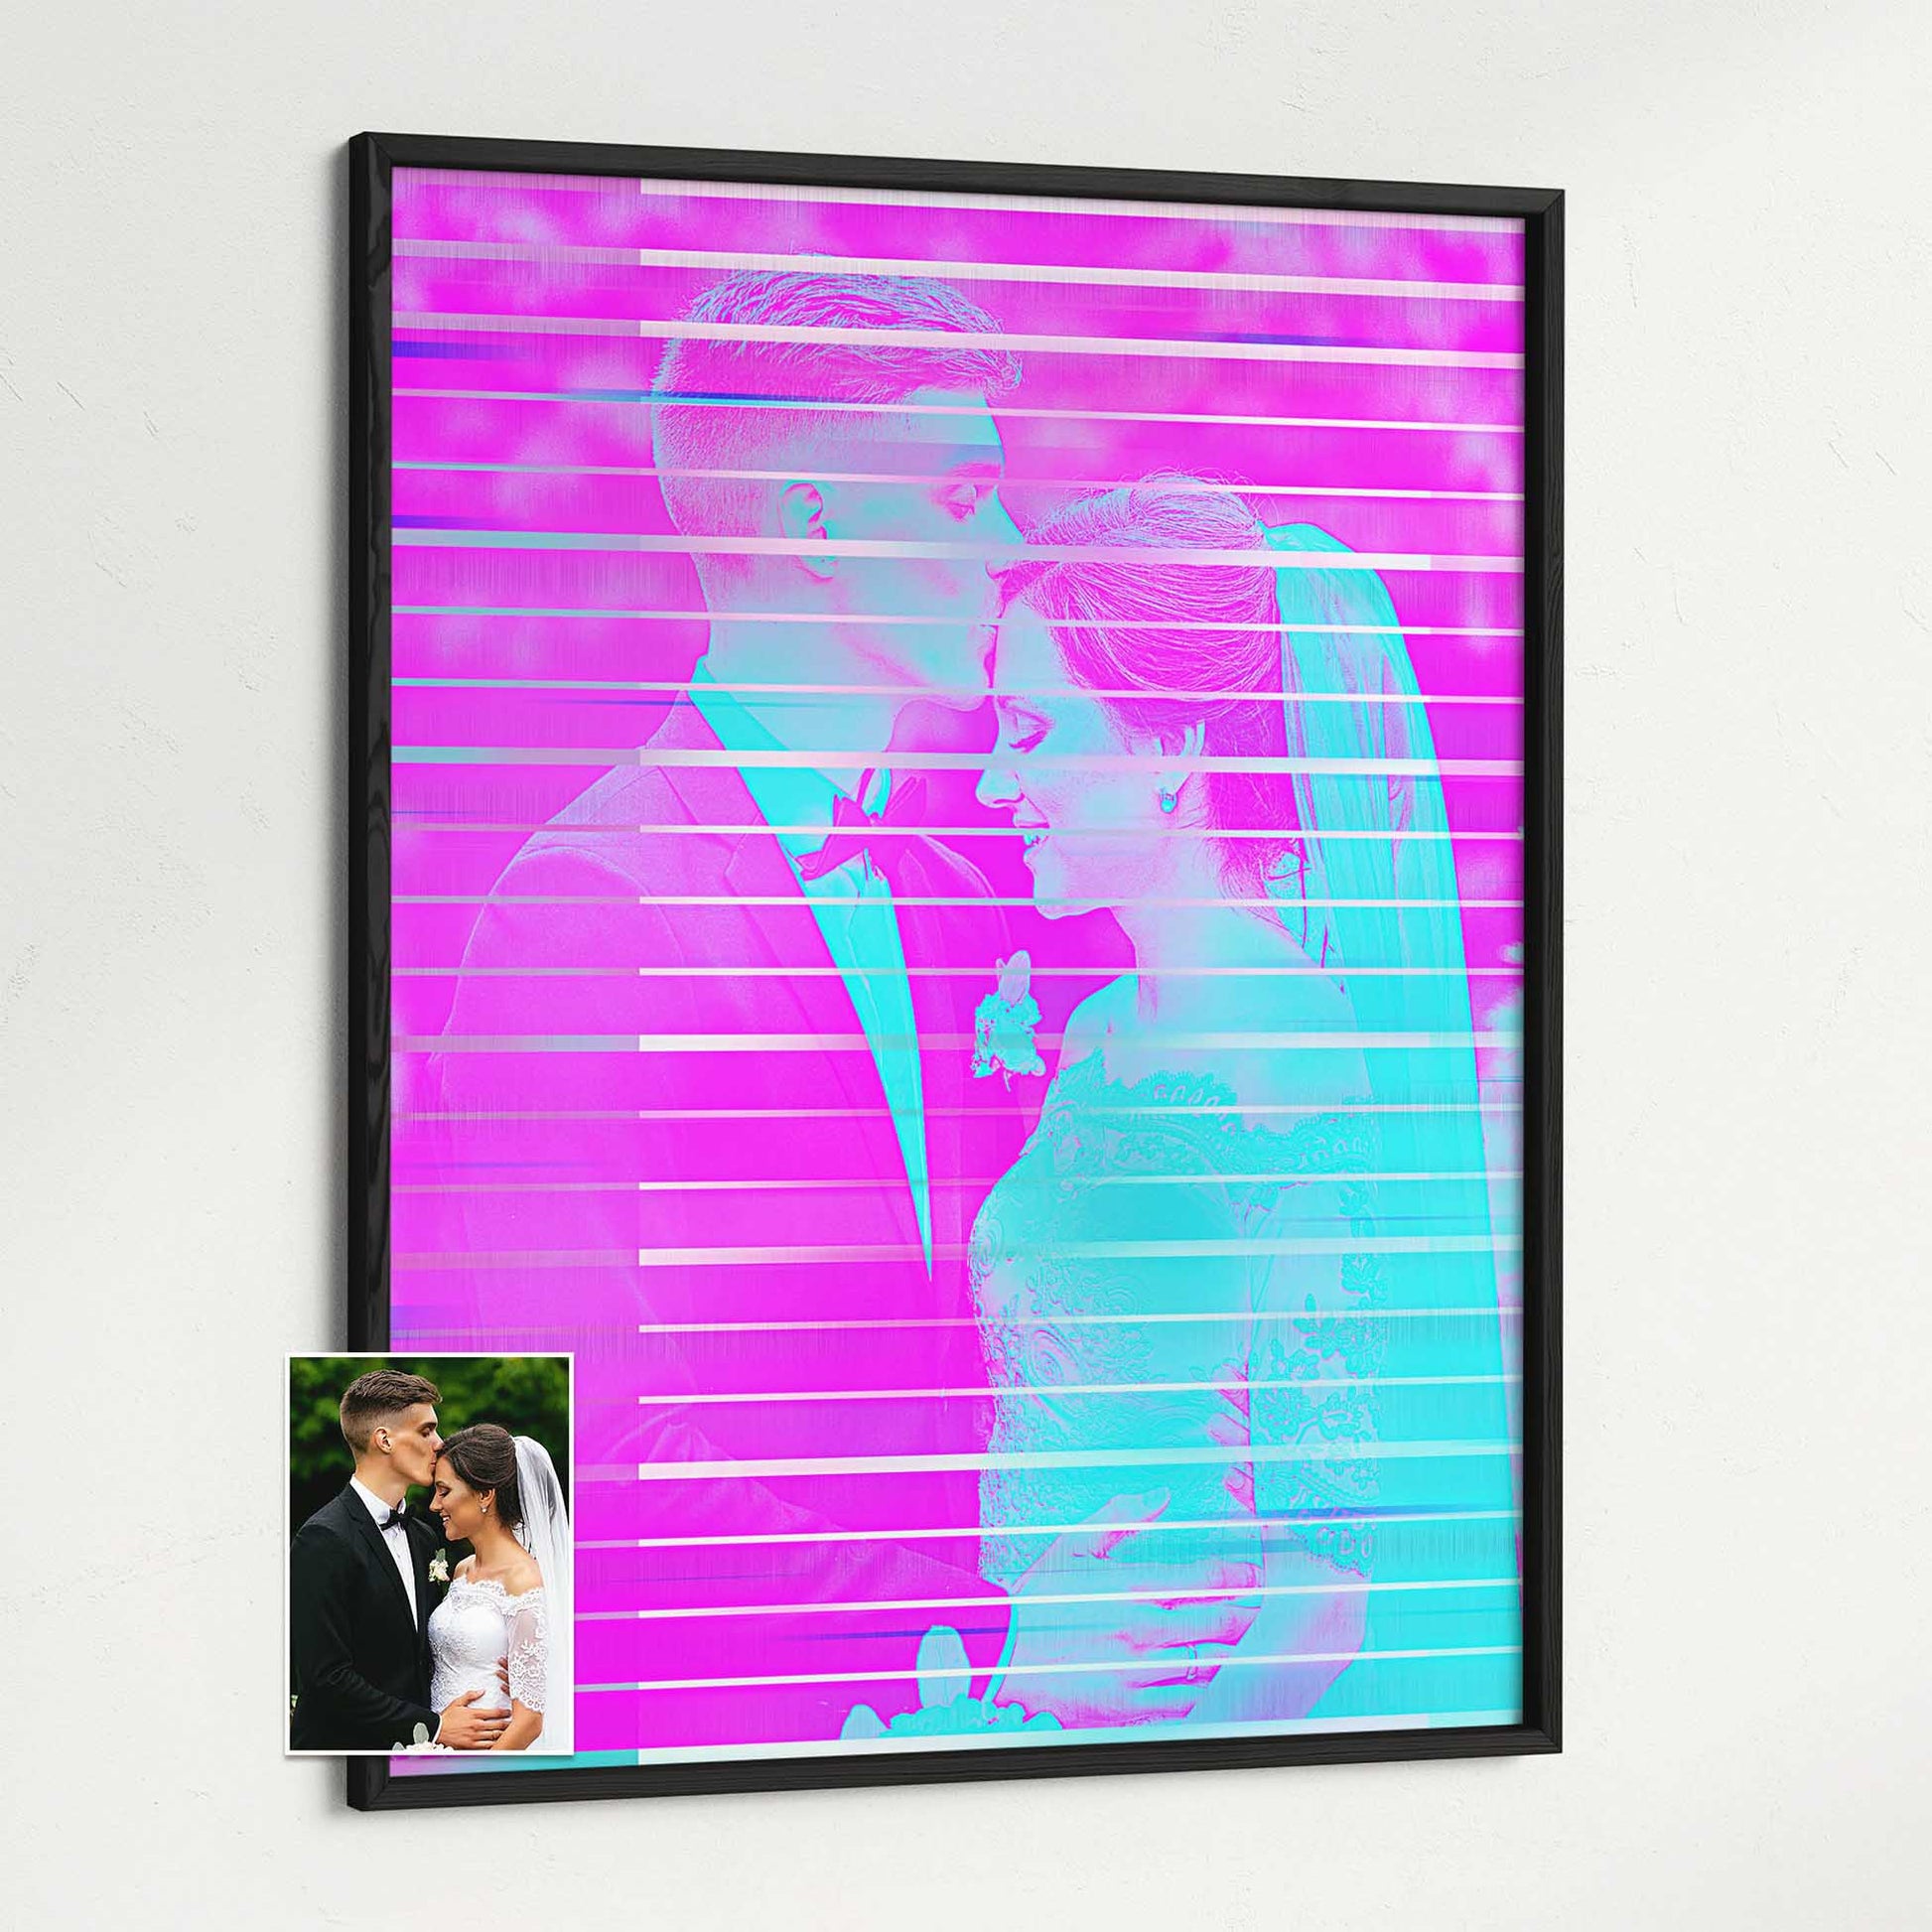 Elevate your space with our Personalised Purple & Blue Framed Print. The vibrant and vivid colors create an eye-catching image that sparks creativity and adds a fun and cool touch to any room. With its unique and beautiful design